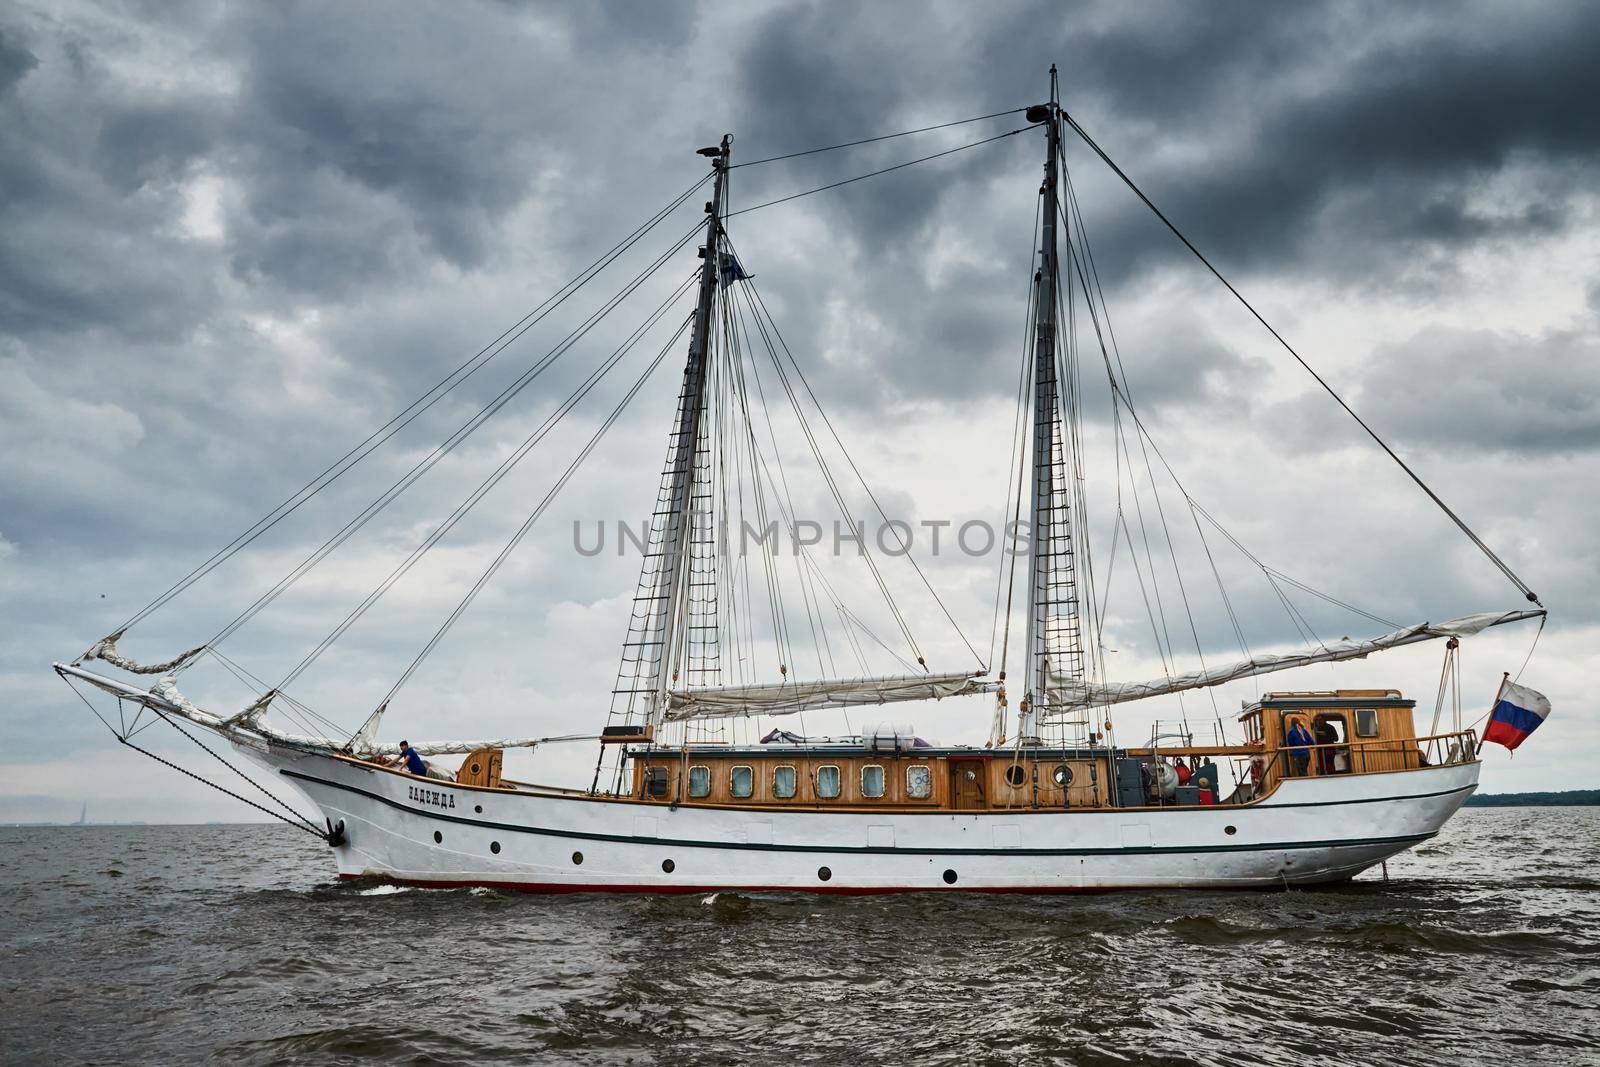 Russia, St.Petersburg, 31 August 2020: Antique sailing frigate of white color to the sea, the lowering storm sky, sails are lowered, masts and ropes. High quality photo